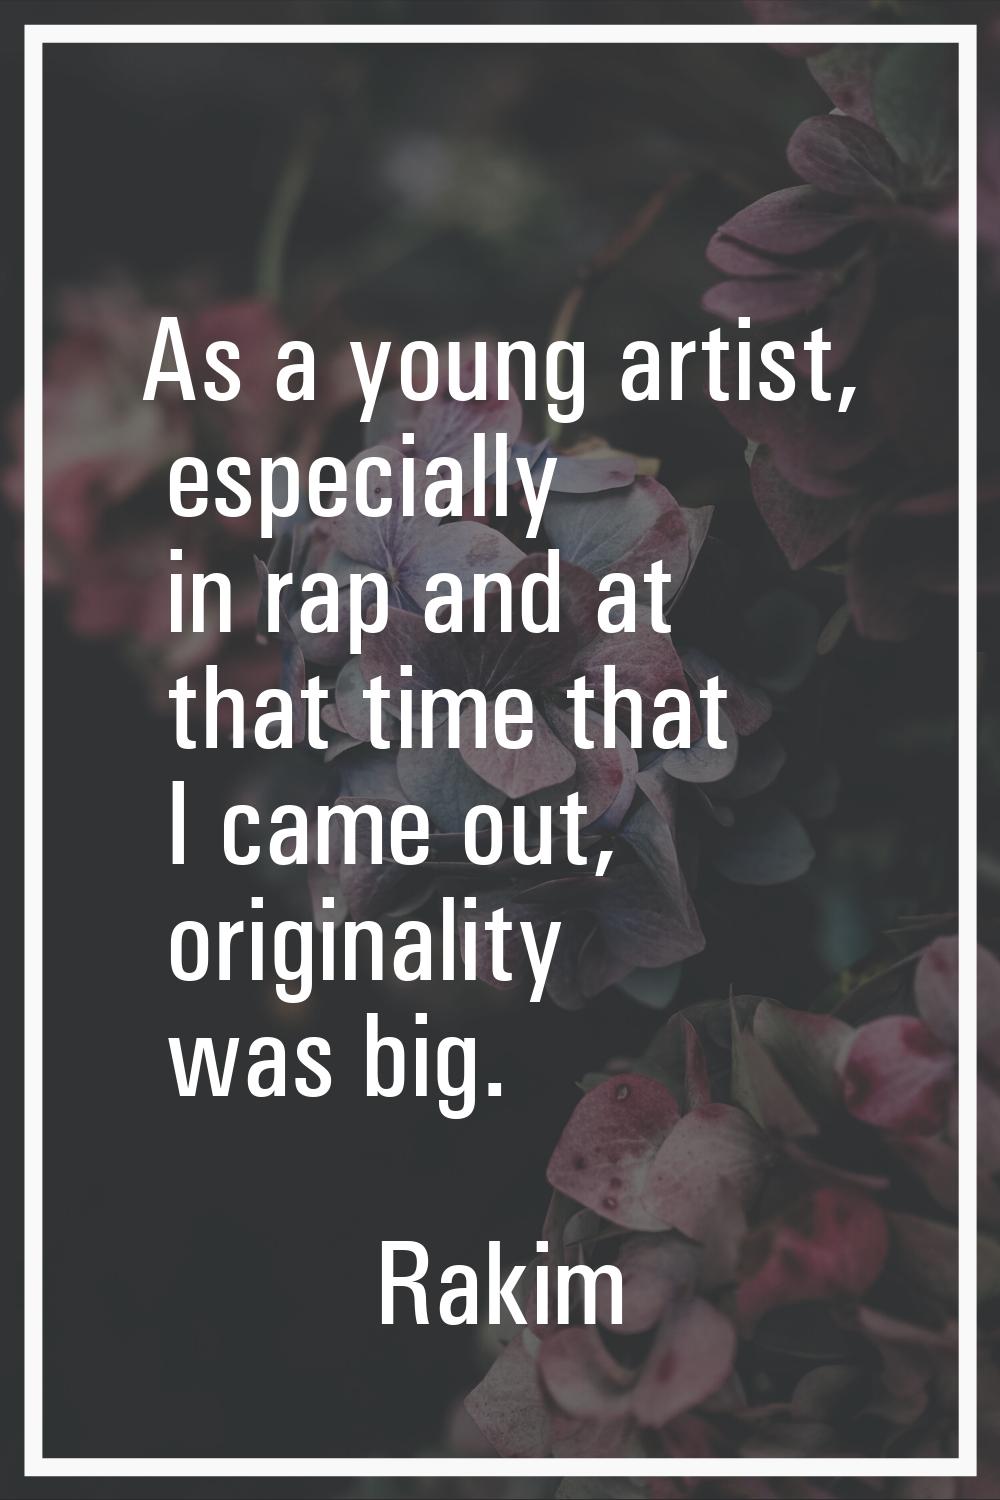 As a young artist, especially in rap and at that time that I came out, originality was big.